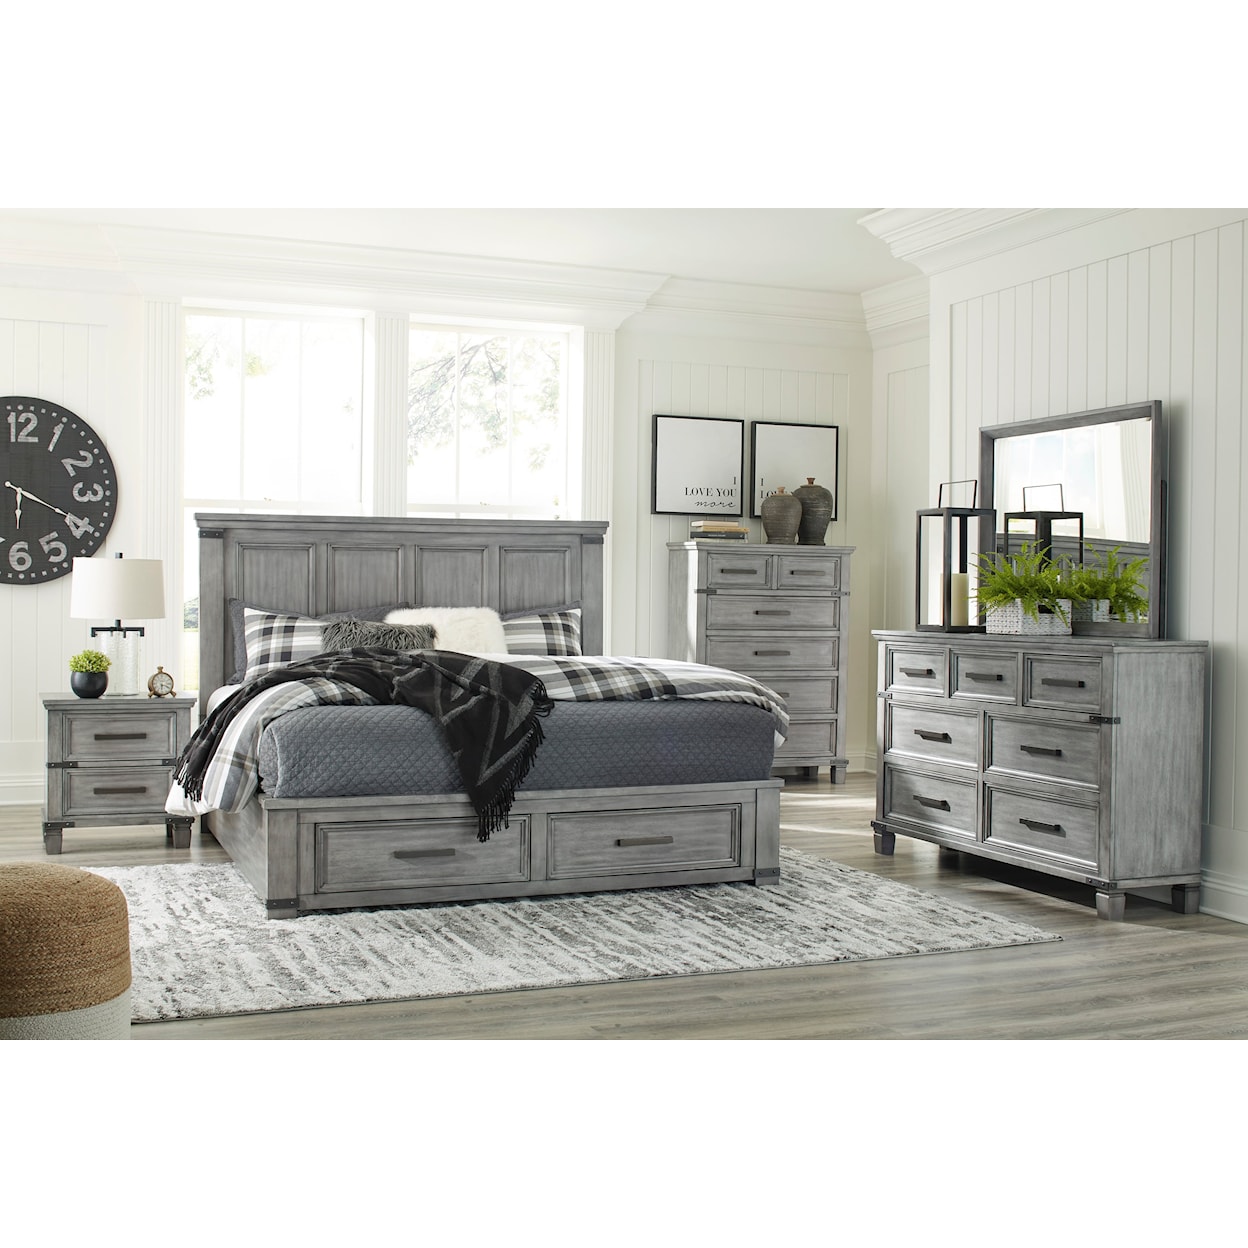 Signature Design by Ashley Russelyn 6 Piece King Bedroom Set